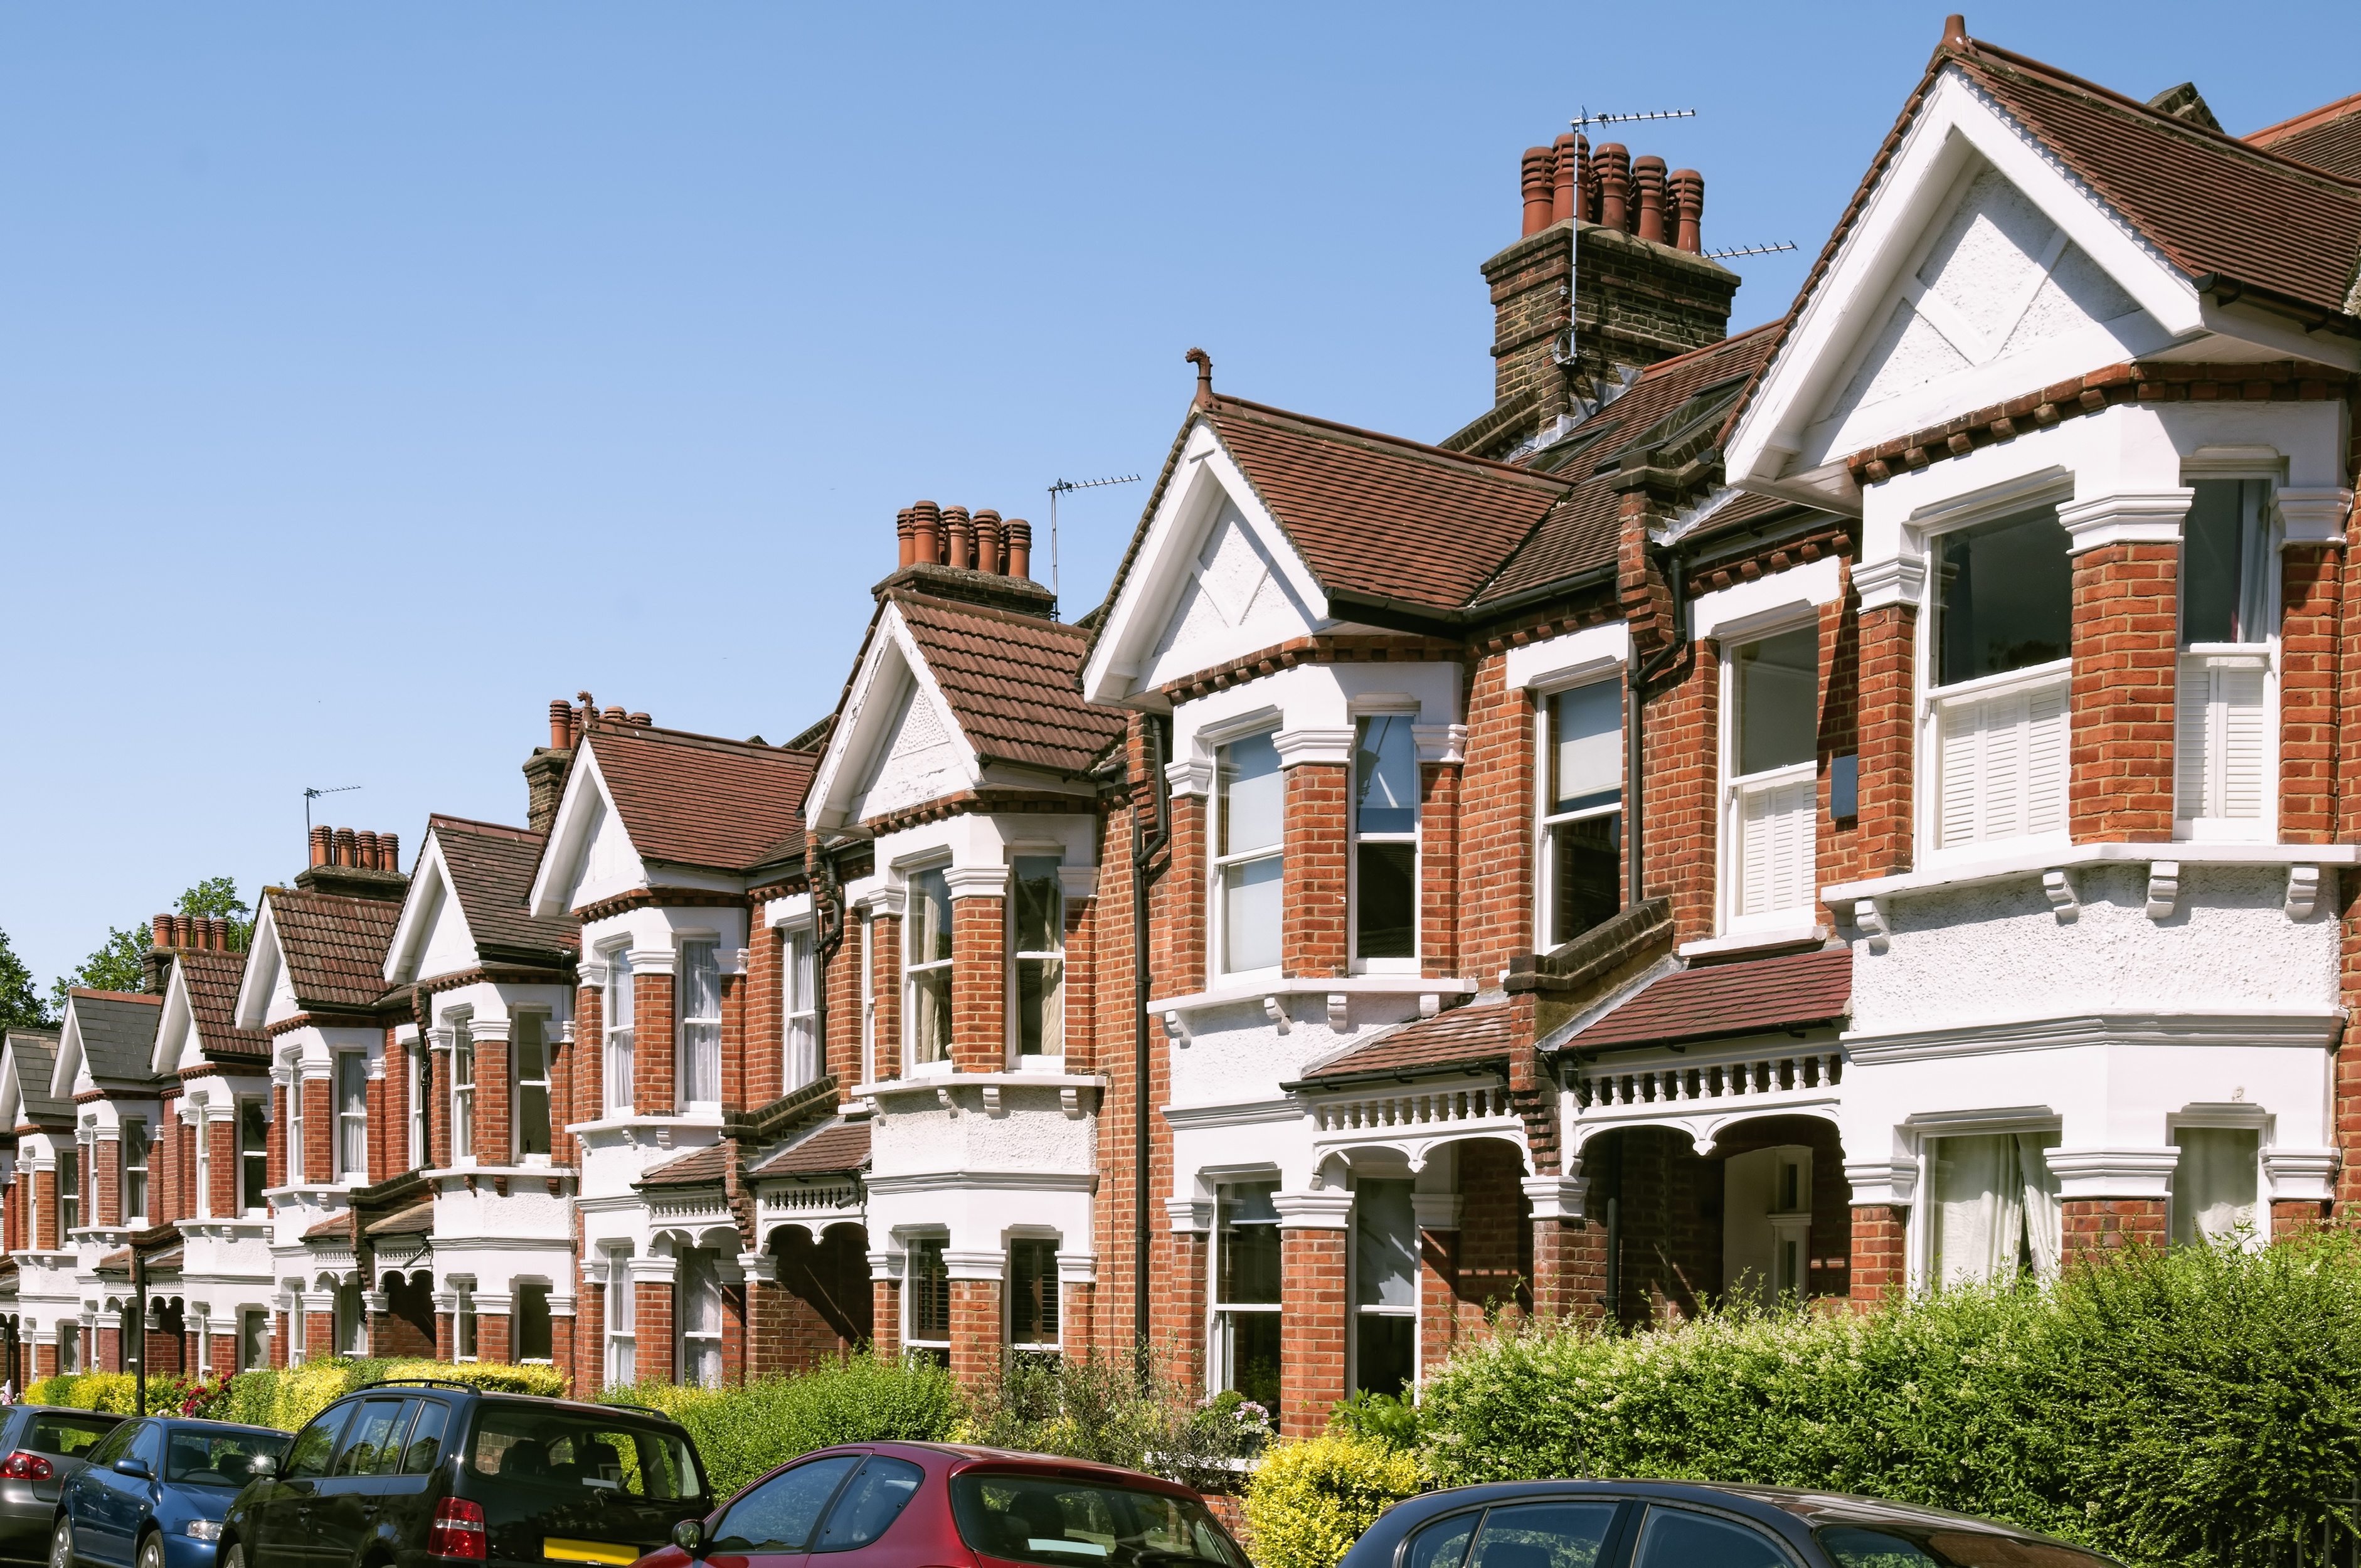 Landlords provide the stability that many tenants 'need and want'